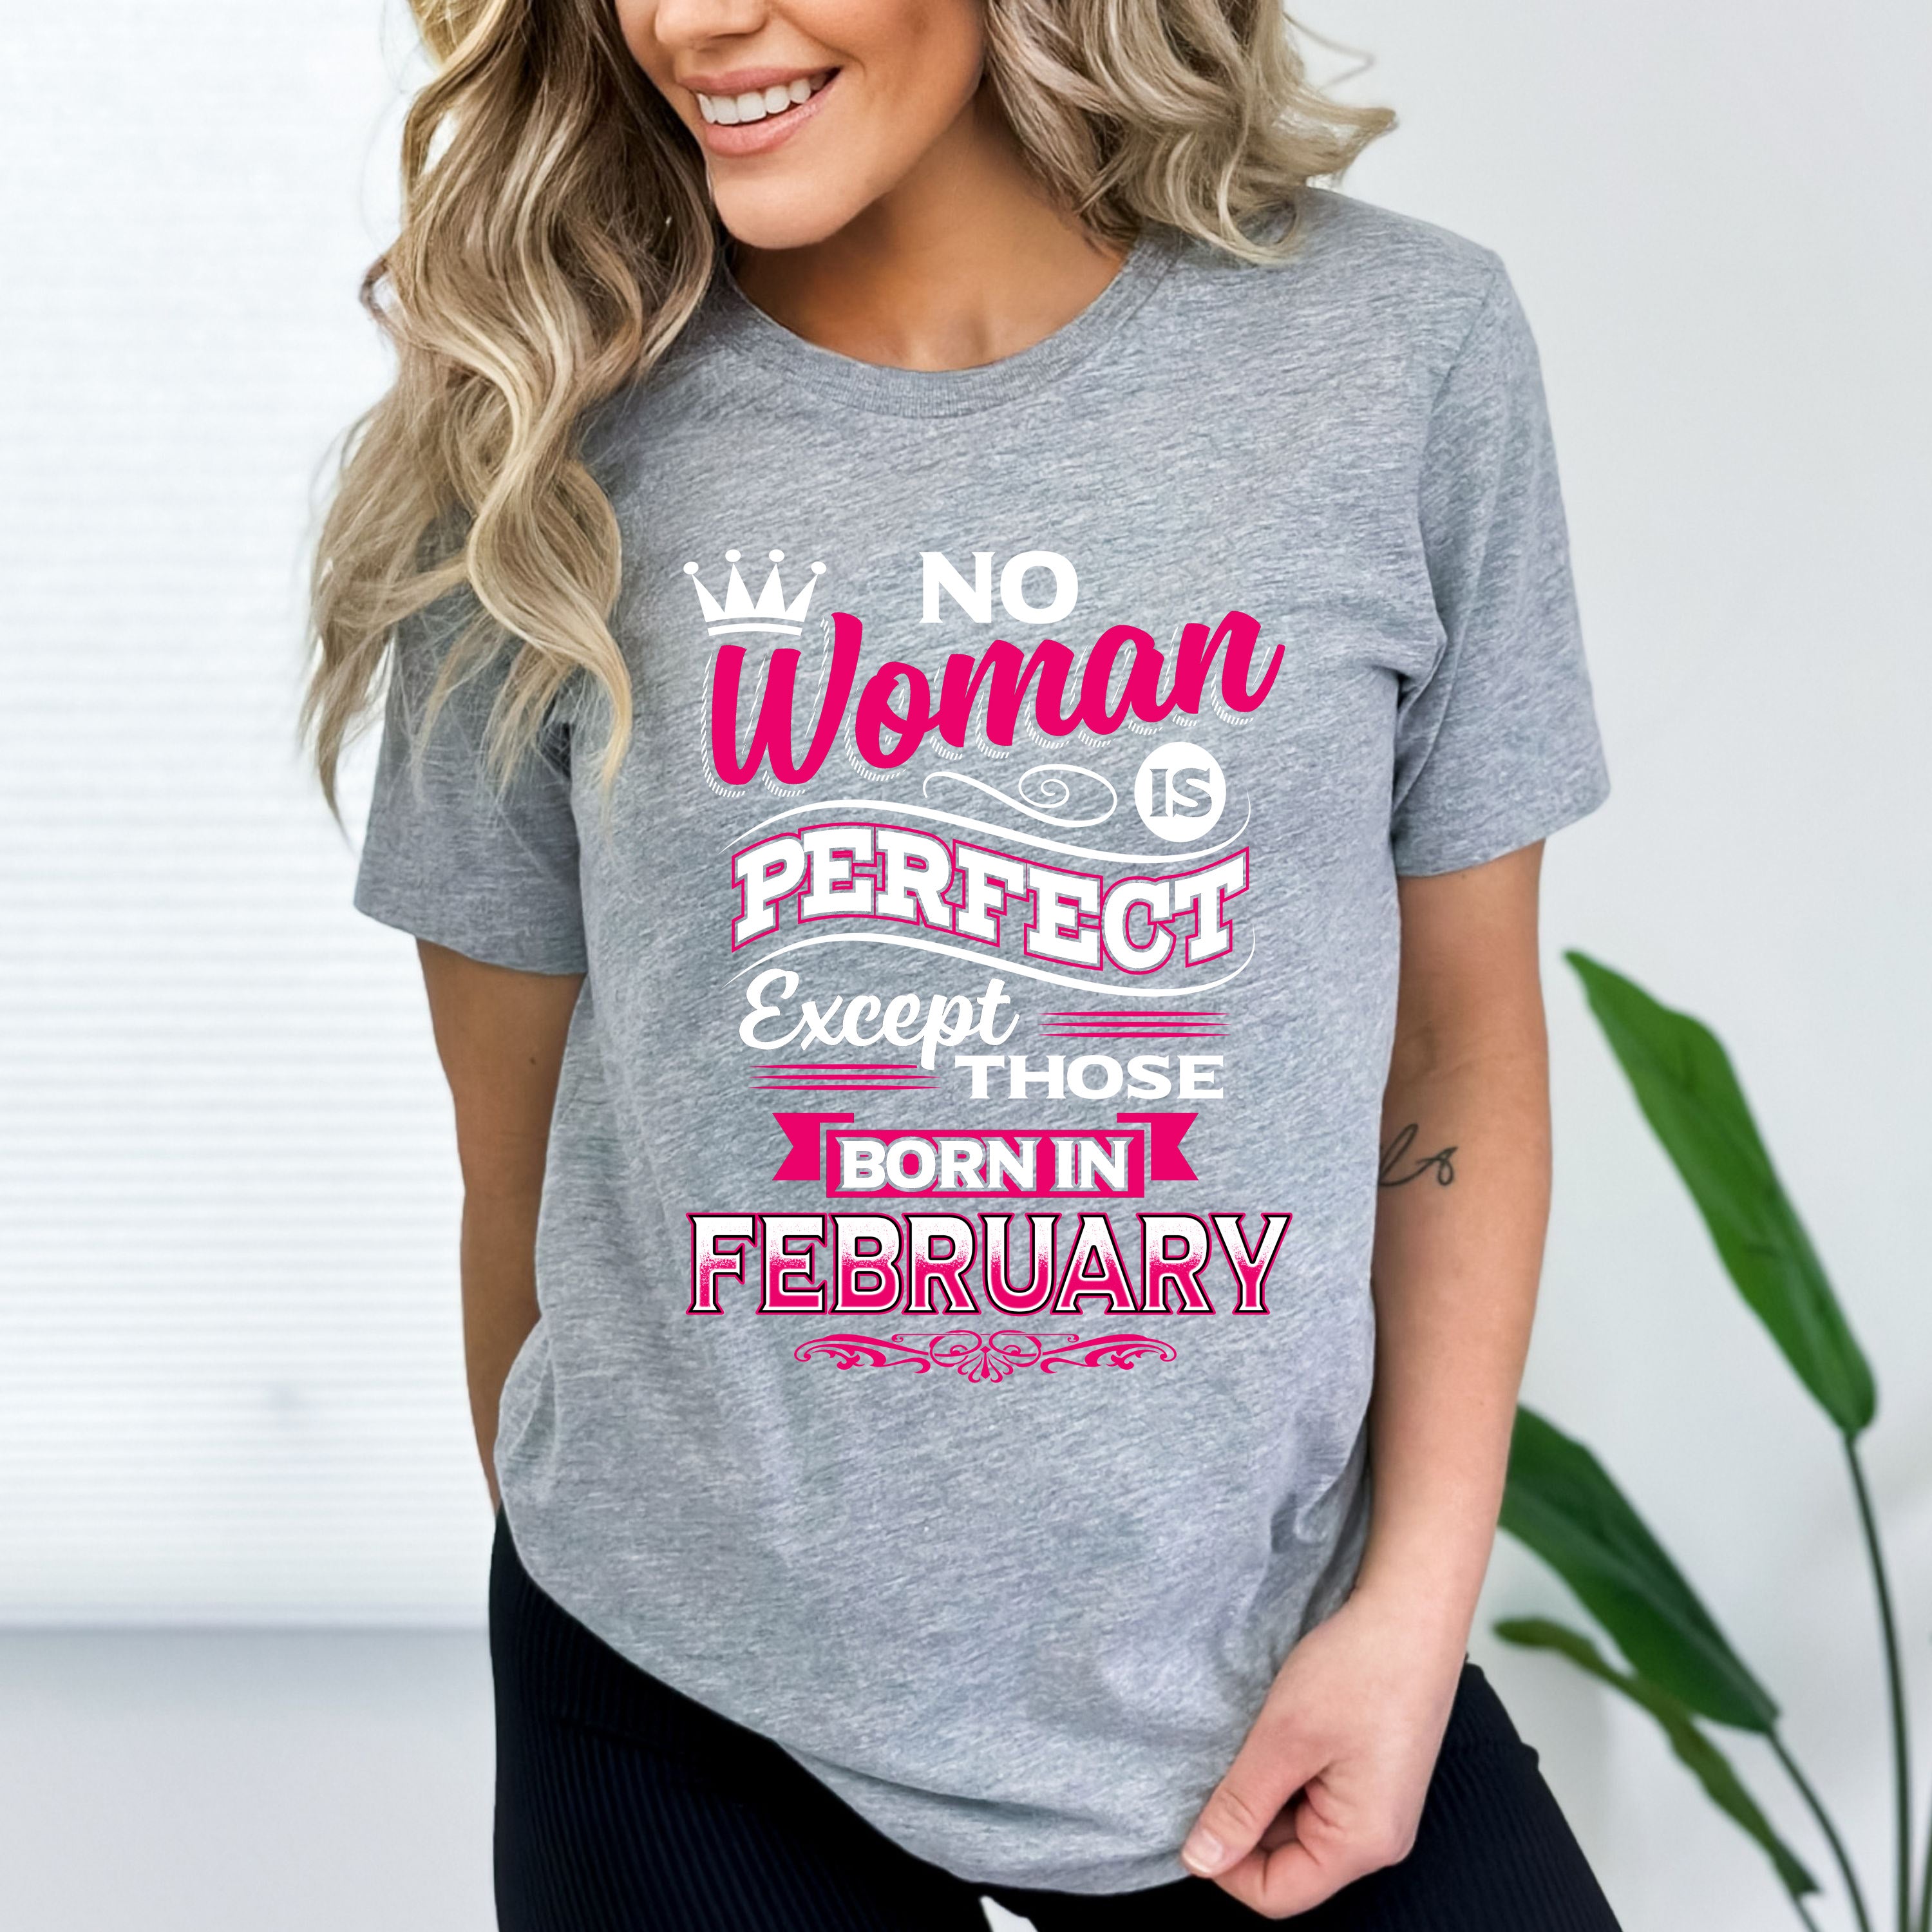 "No Woman Is Perfect Except Those Born In February"